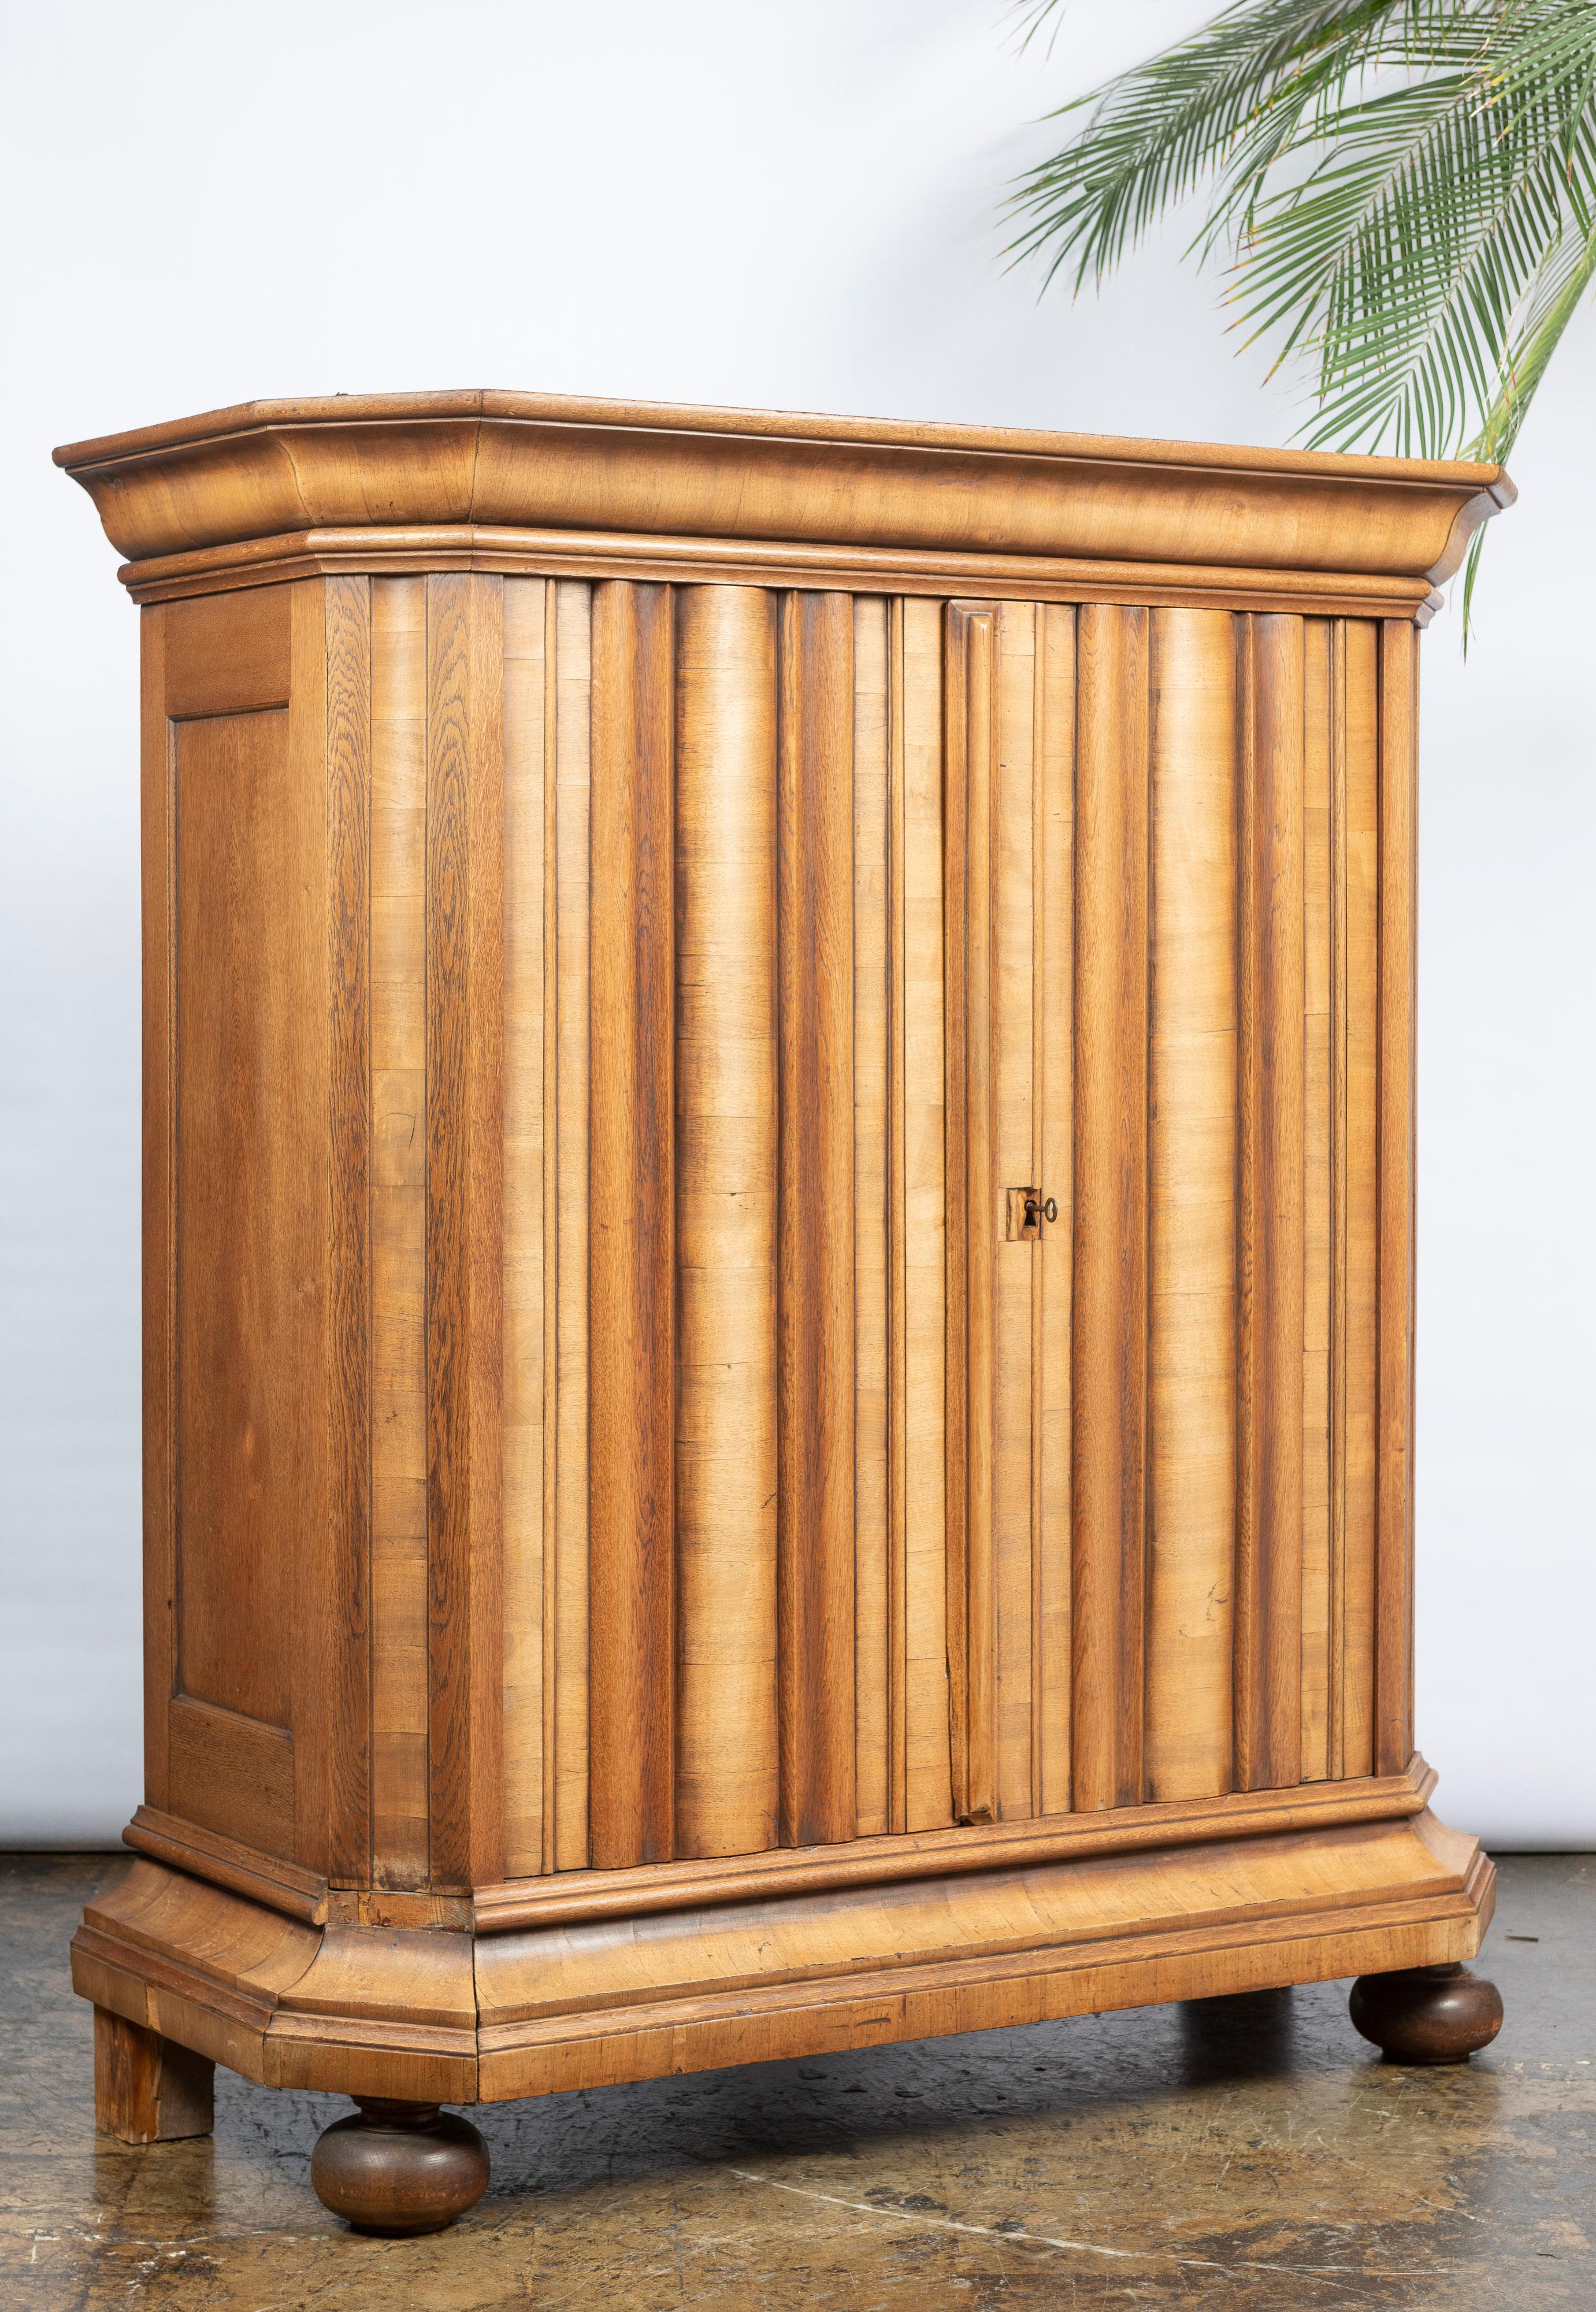 This substantial antique oak wardrobe has simple, elegant lines and great functionality. The timeless design adds to the appeal of the gorgeous oak. The piece contains a pair of adjustable shelves, two corrugated doors which can be locked with the